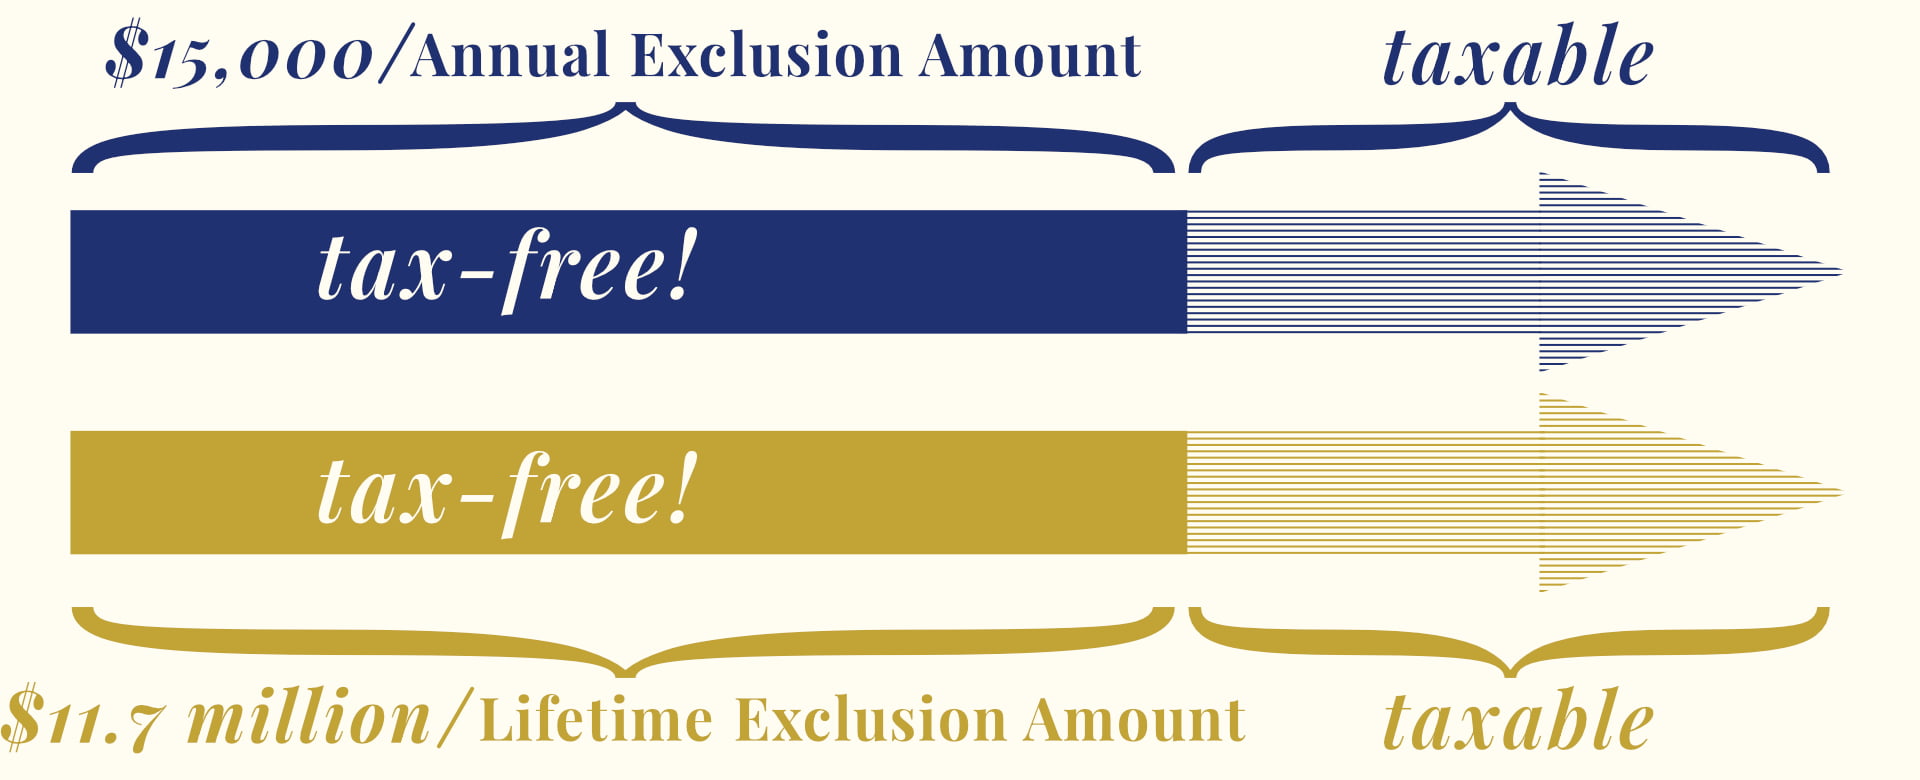 While you may owe tax on a large monetary gift, you can instead put the gift toward your lifetime exclusion amount.